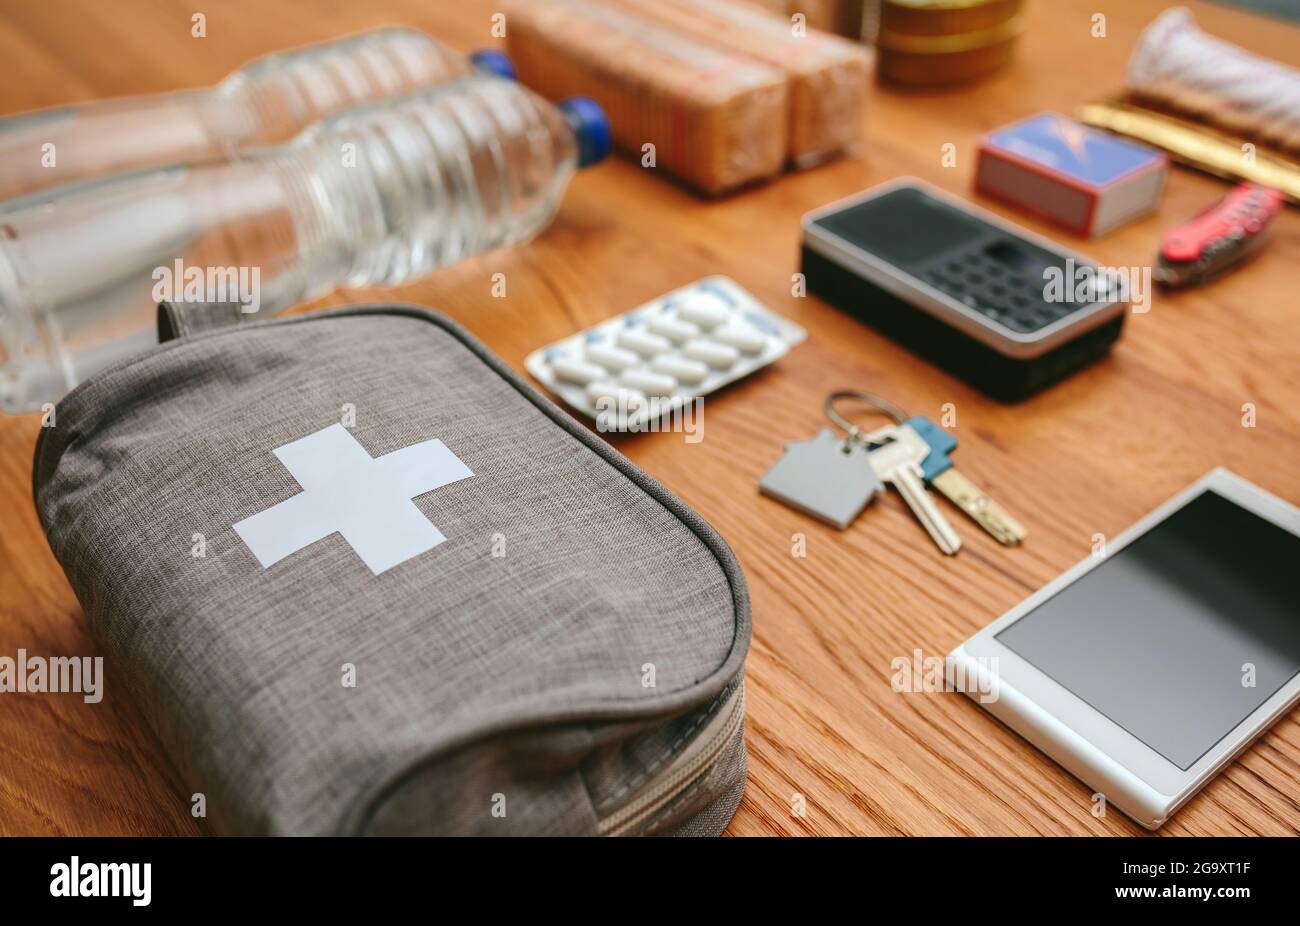 Essential items prepared for emergency backpack Stock Photo